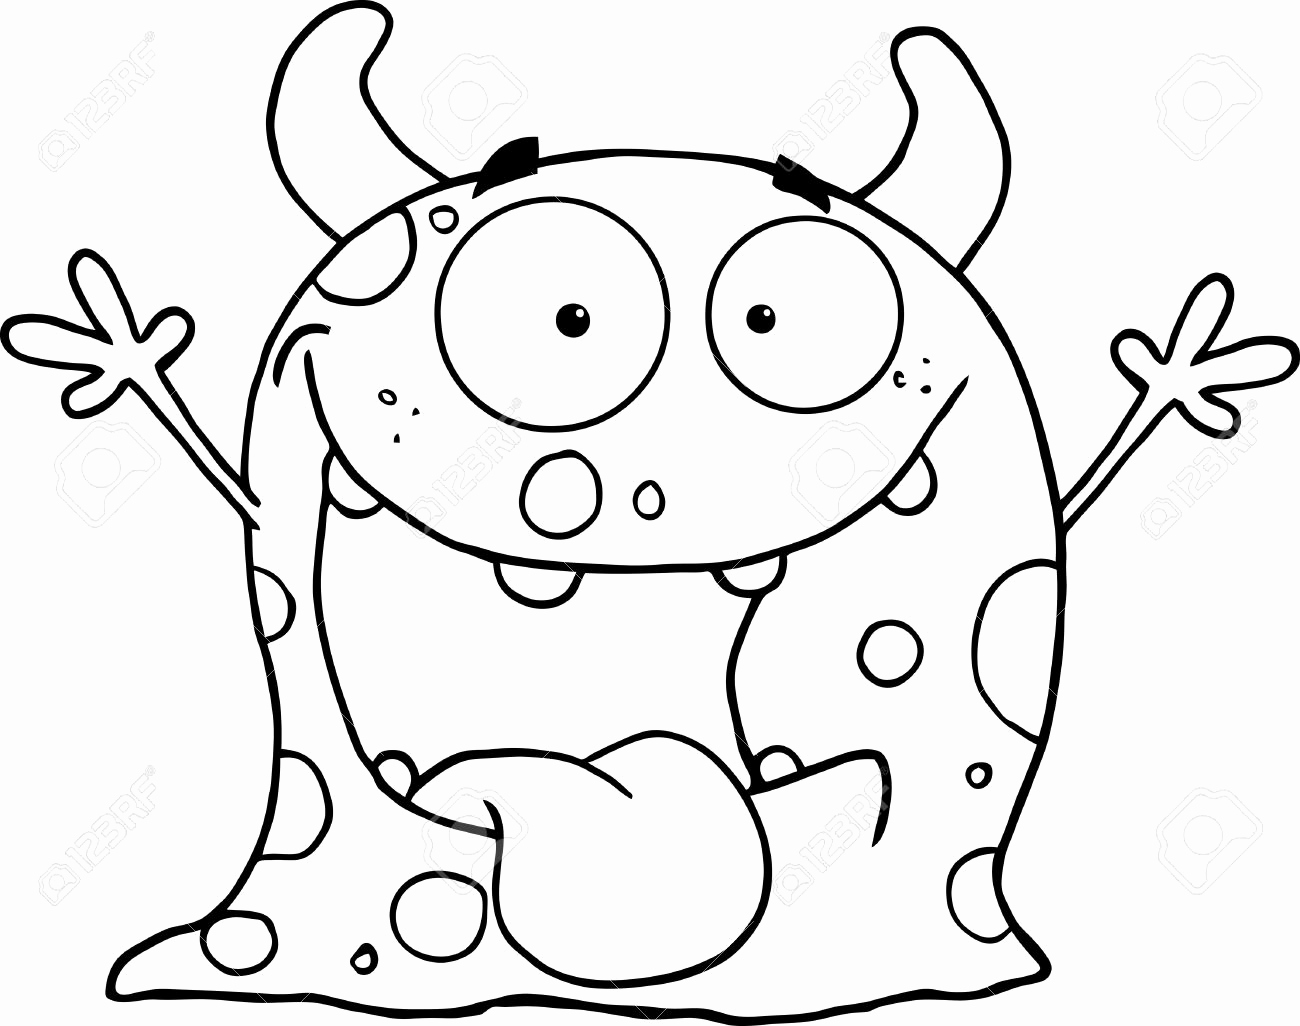 Silly Monster Coloring Pages at GetColorings.com | Free printable